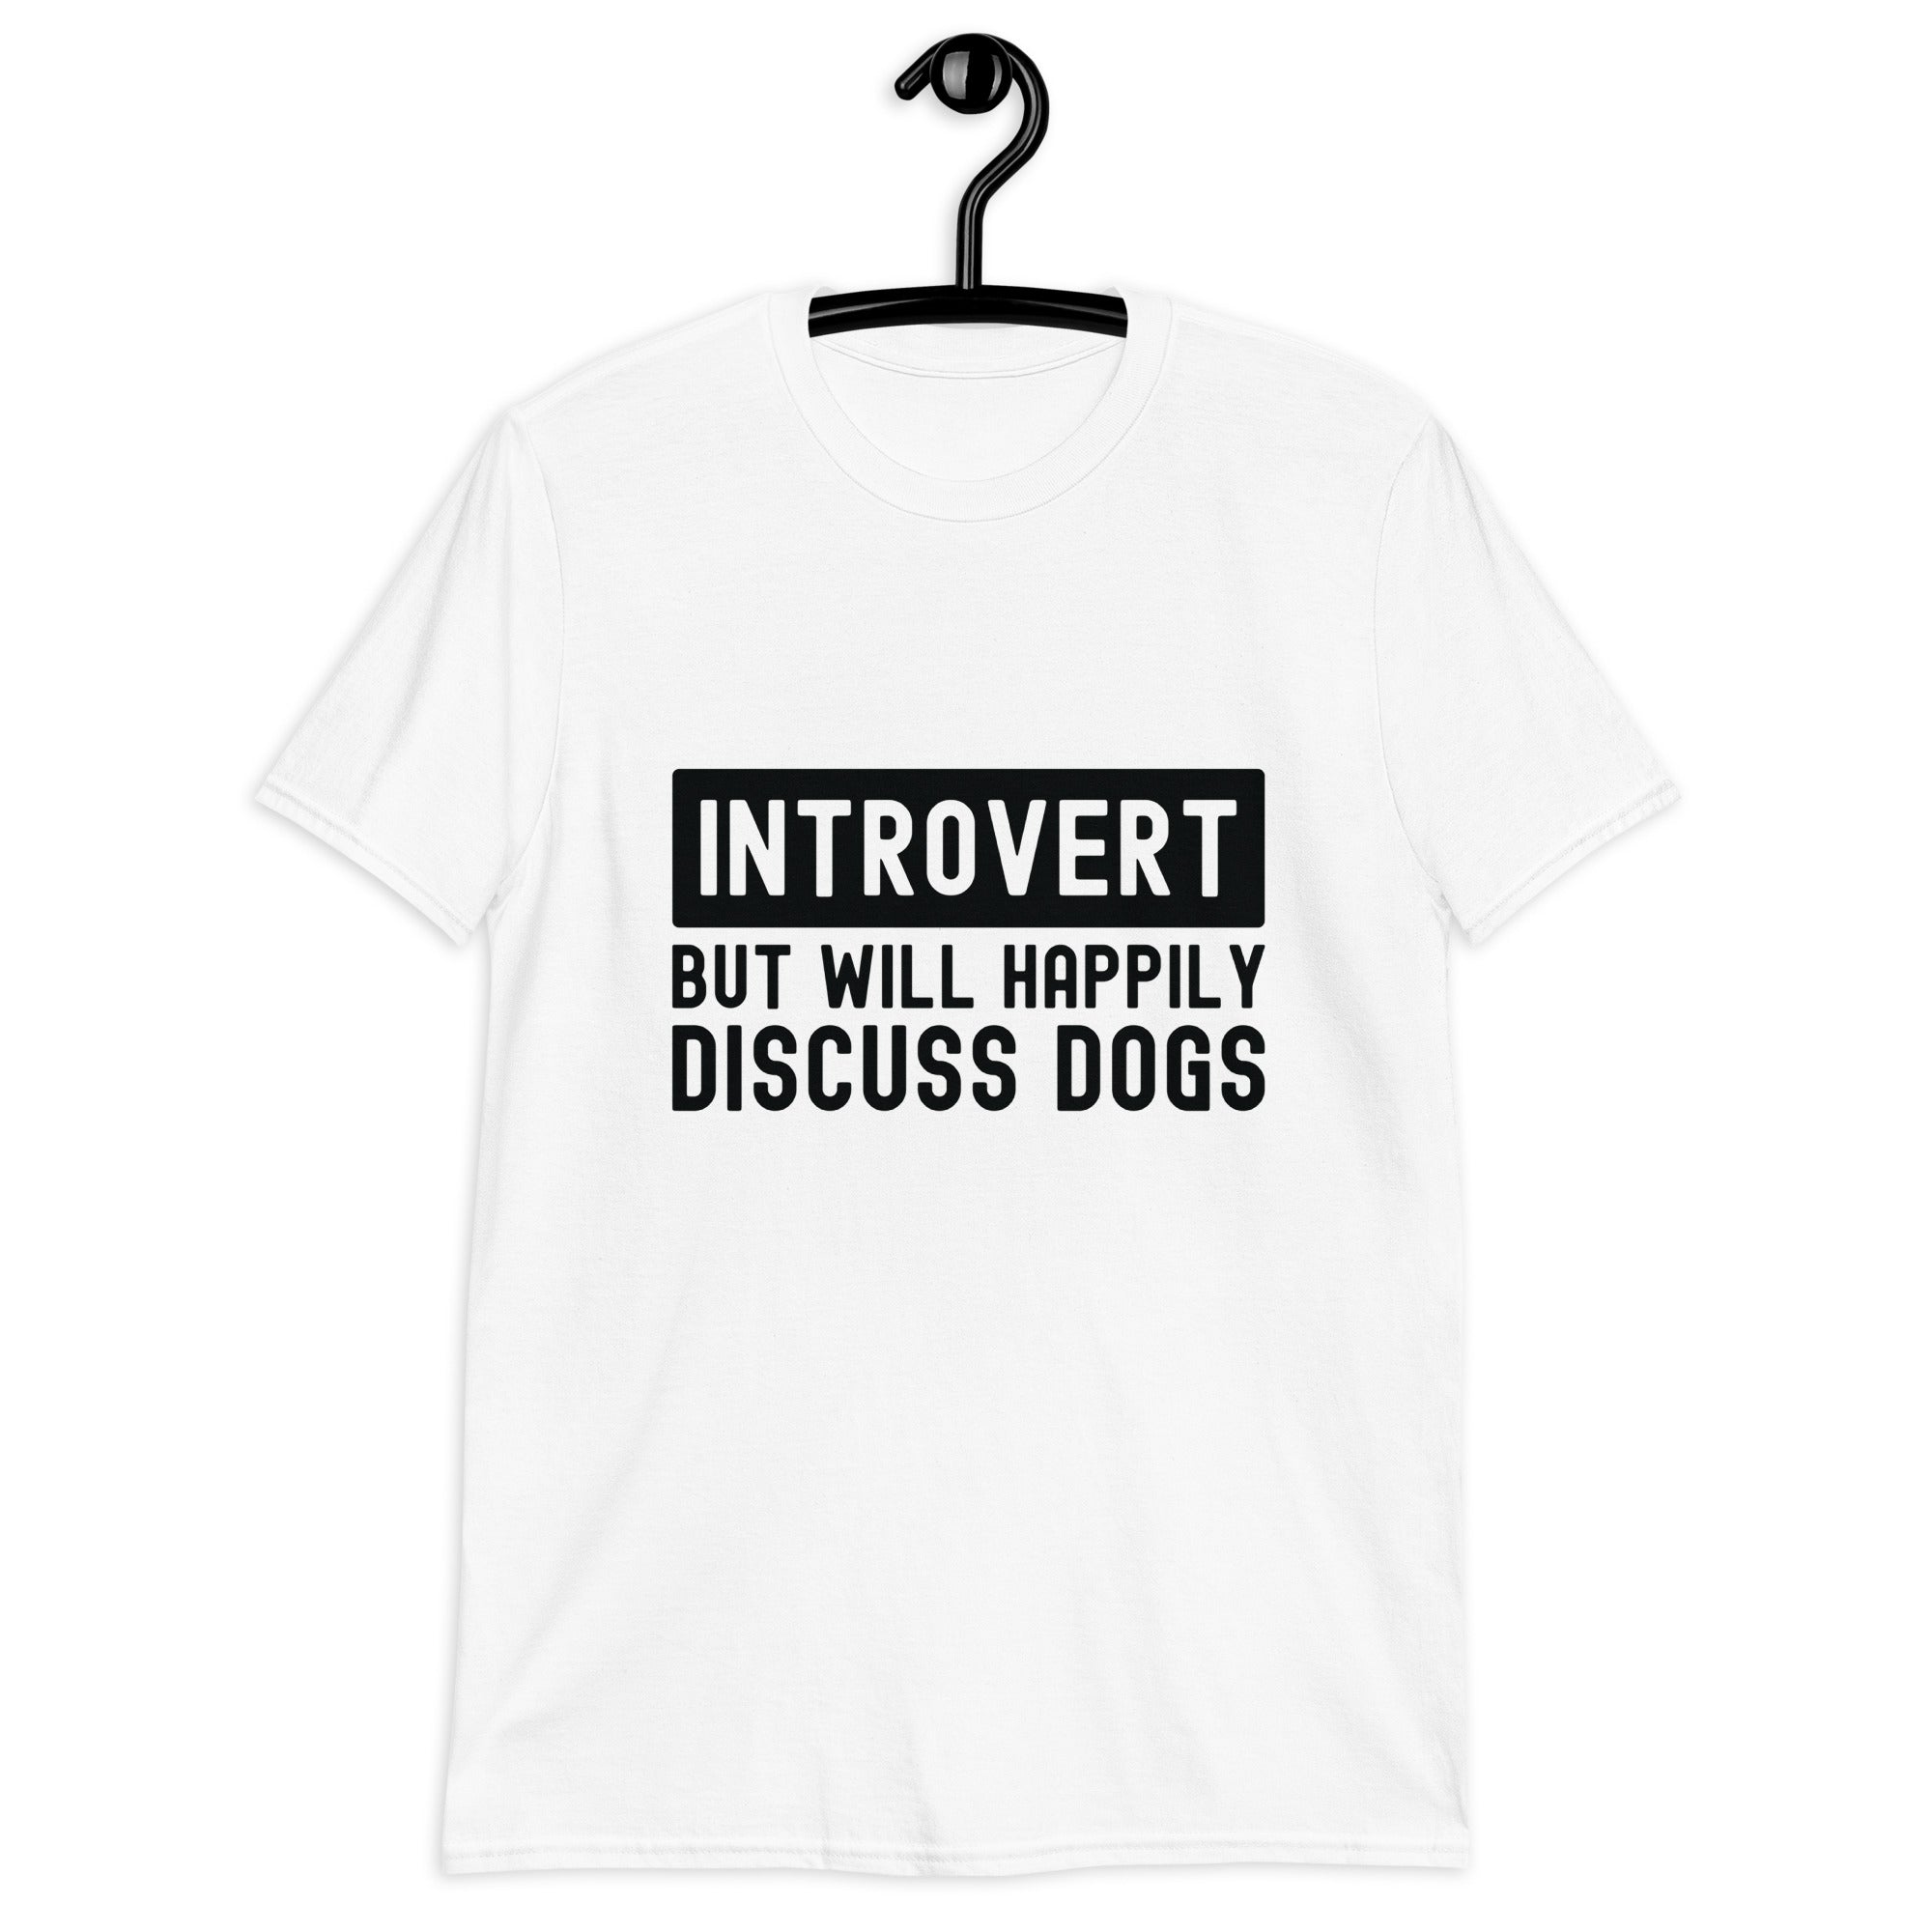 Short-Sleeve Unisex T-Shirt | Introvert but will happily discuss dogs